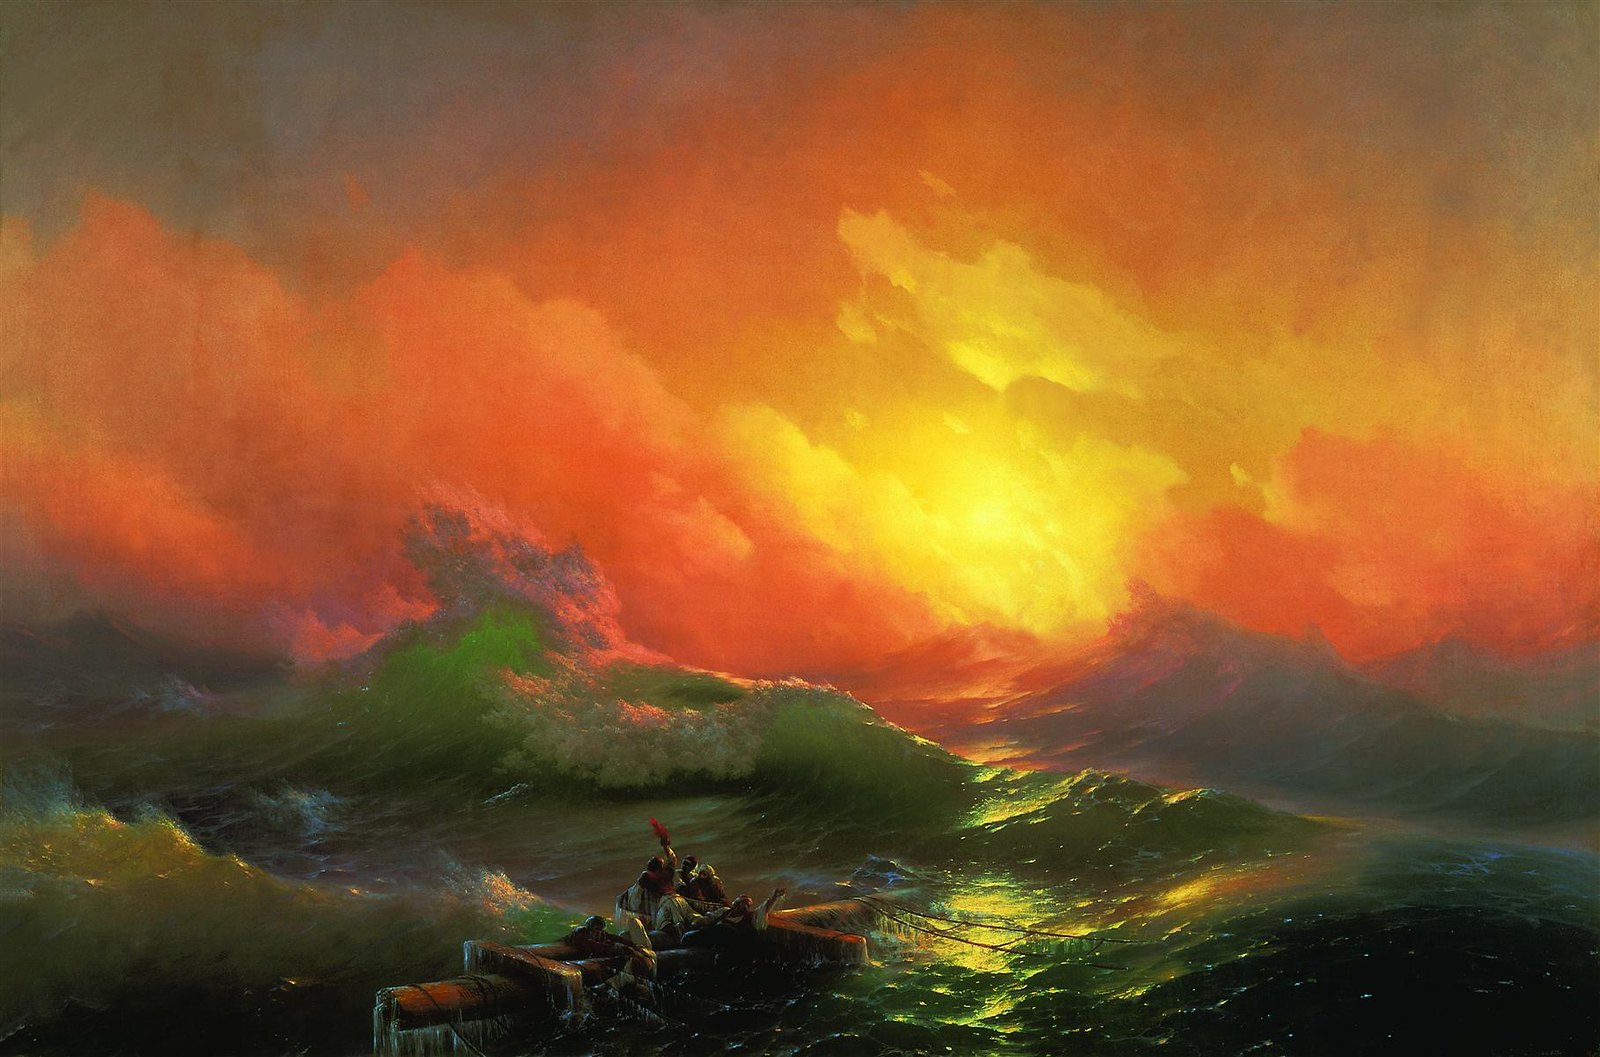 The Ninth Wave by Ivan Aivazovsky, 1850